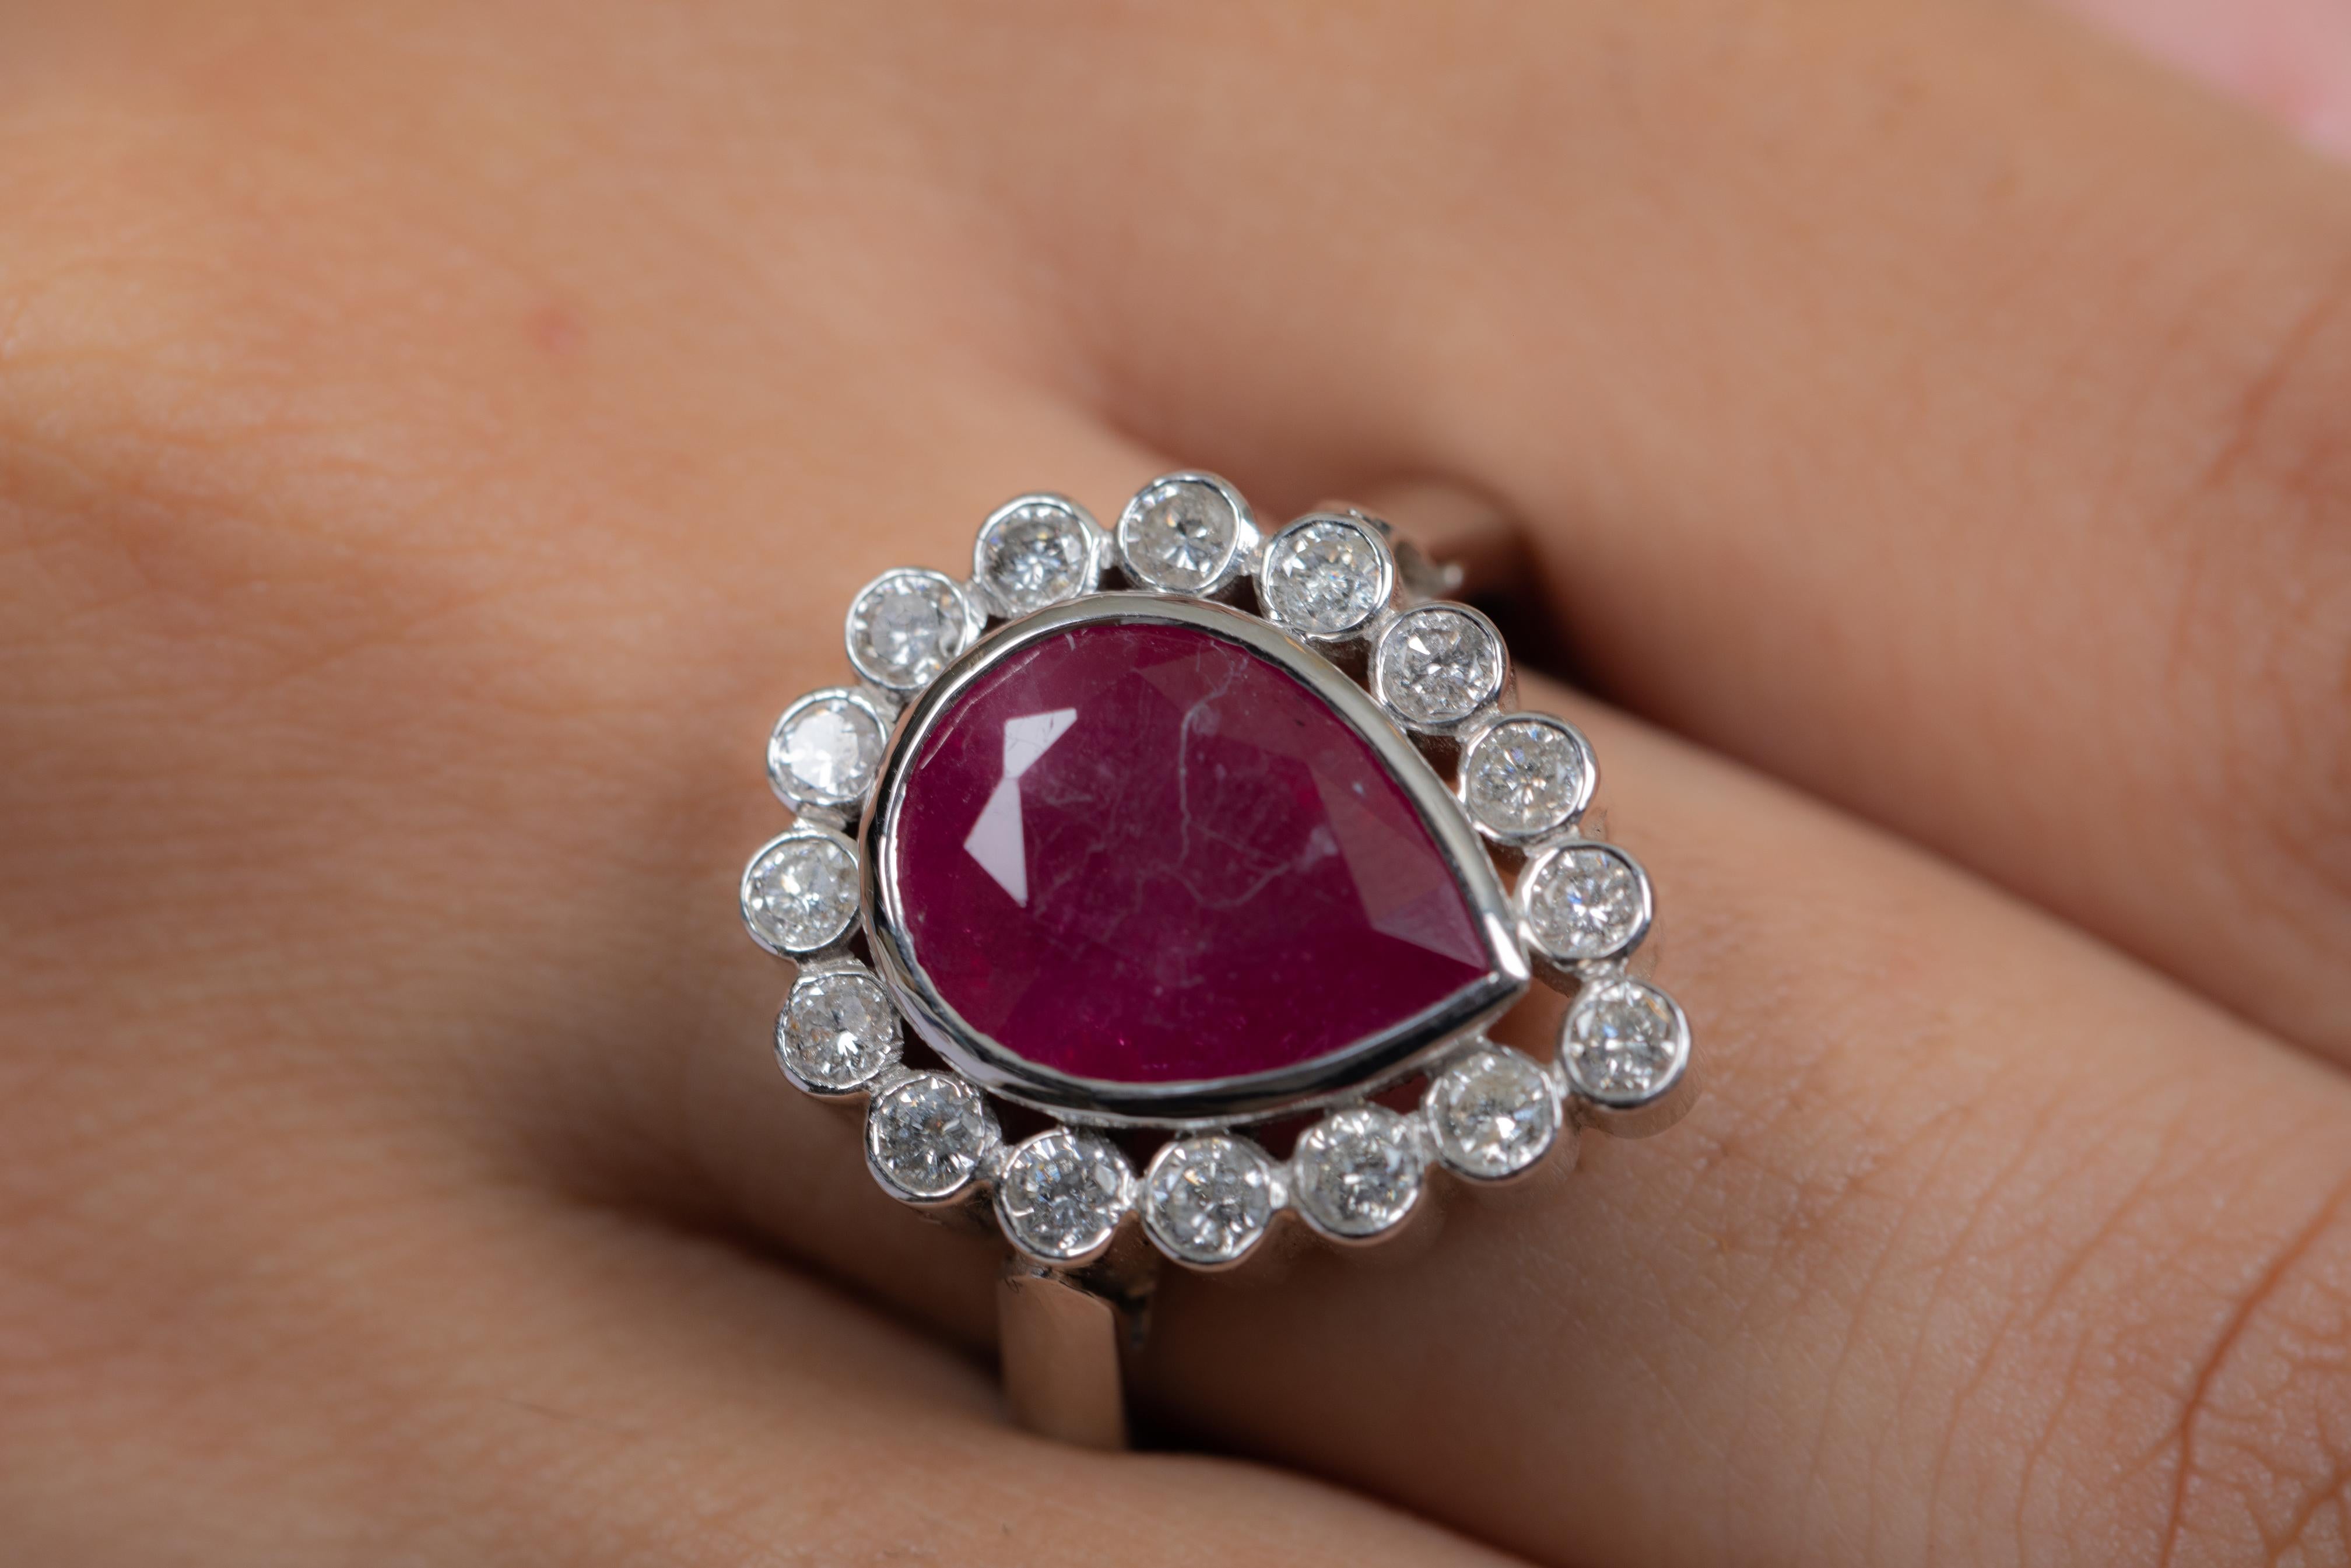 For Sale:  18K White Gold Pear Cut Ruby Cocktail Ring with Diamonds 2